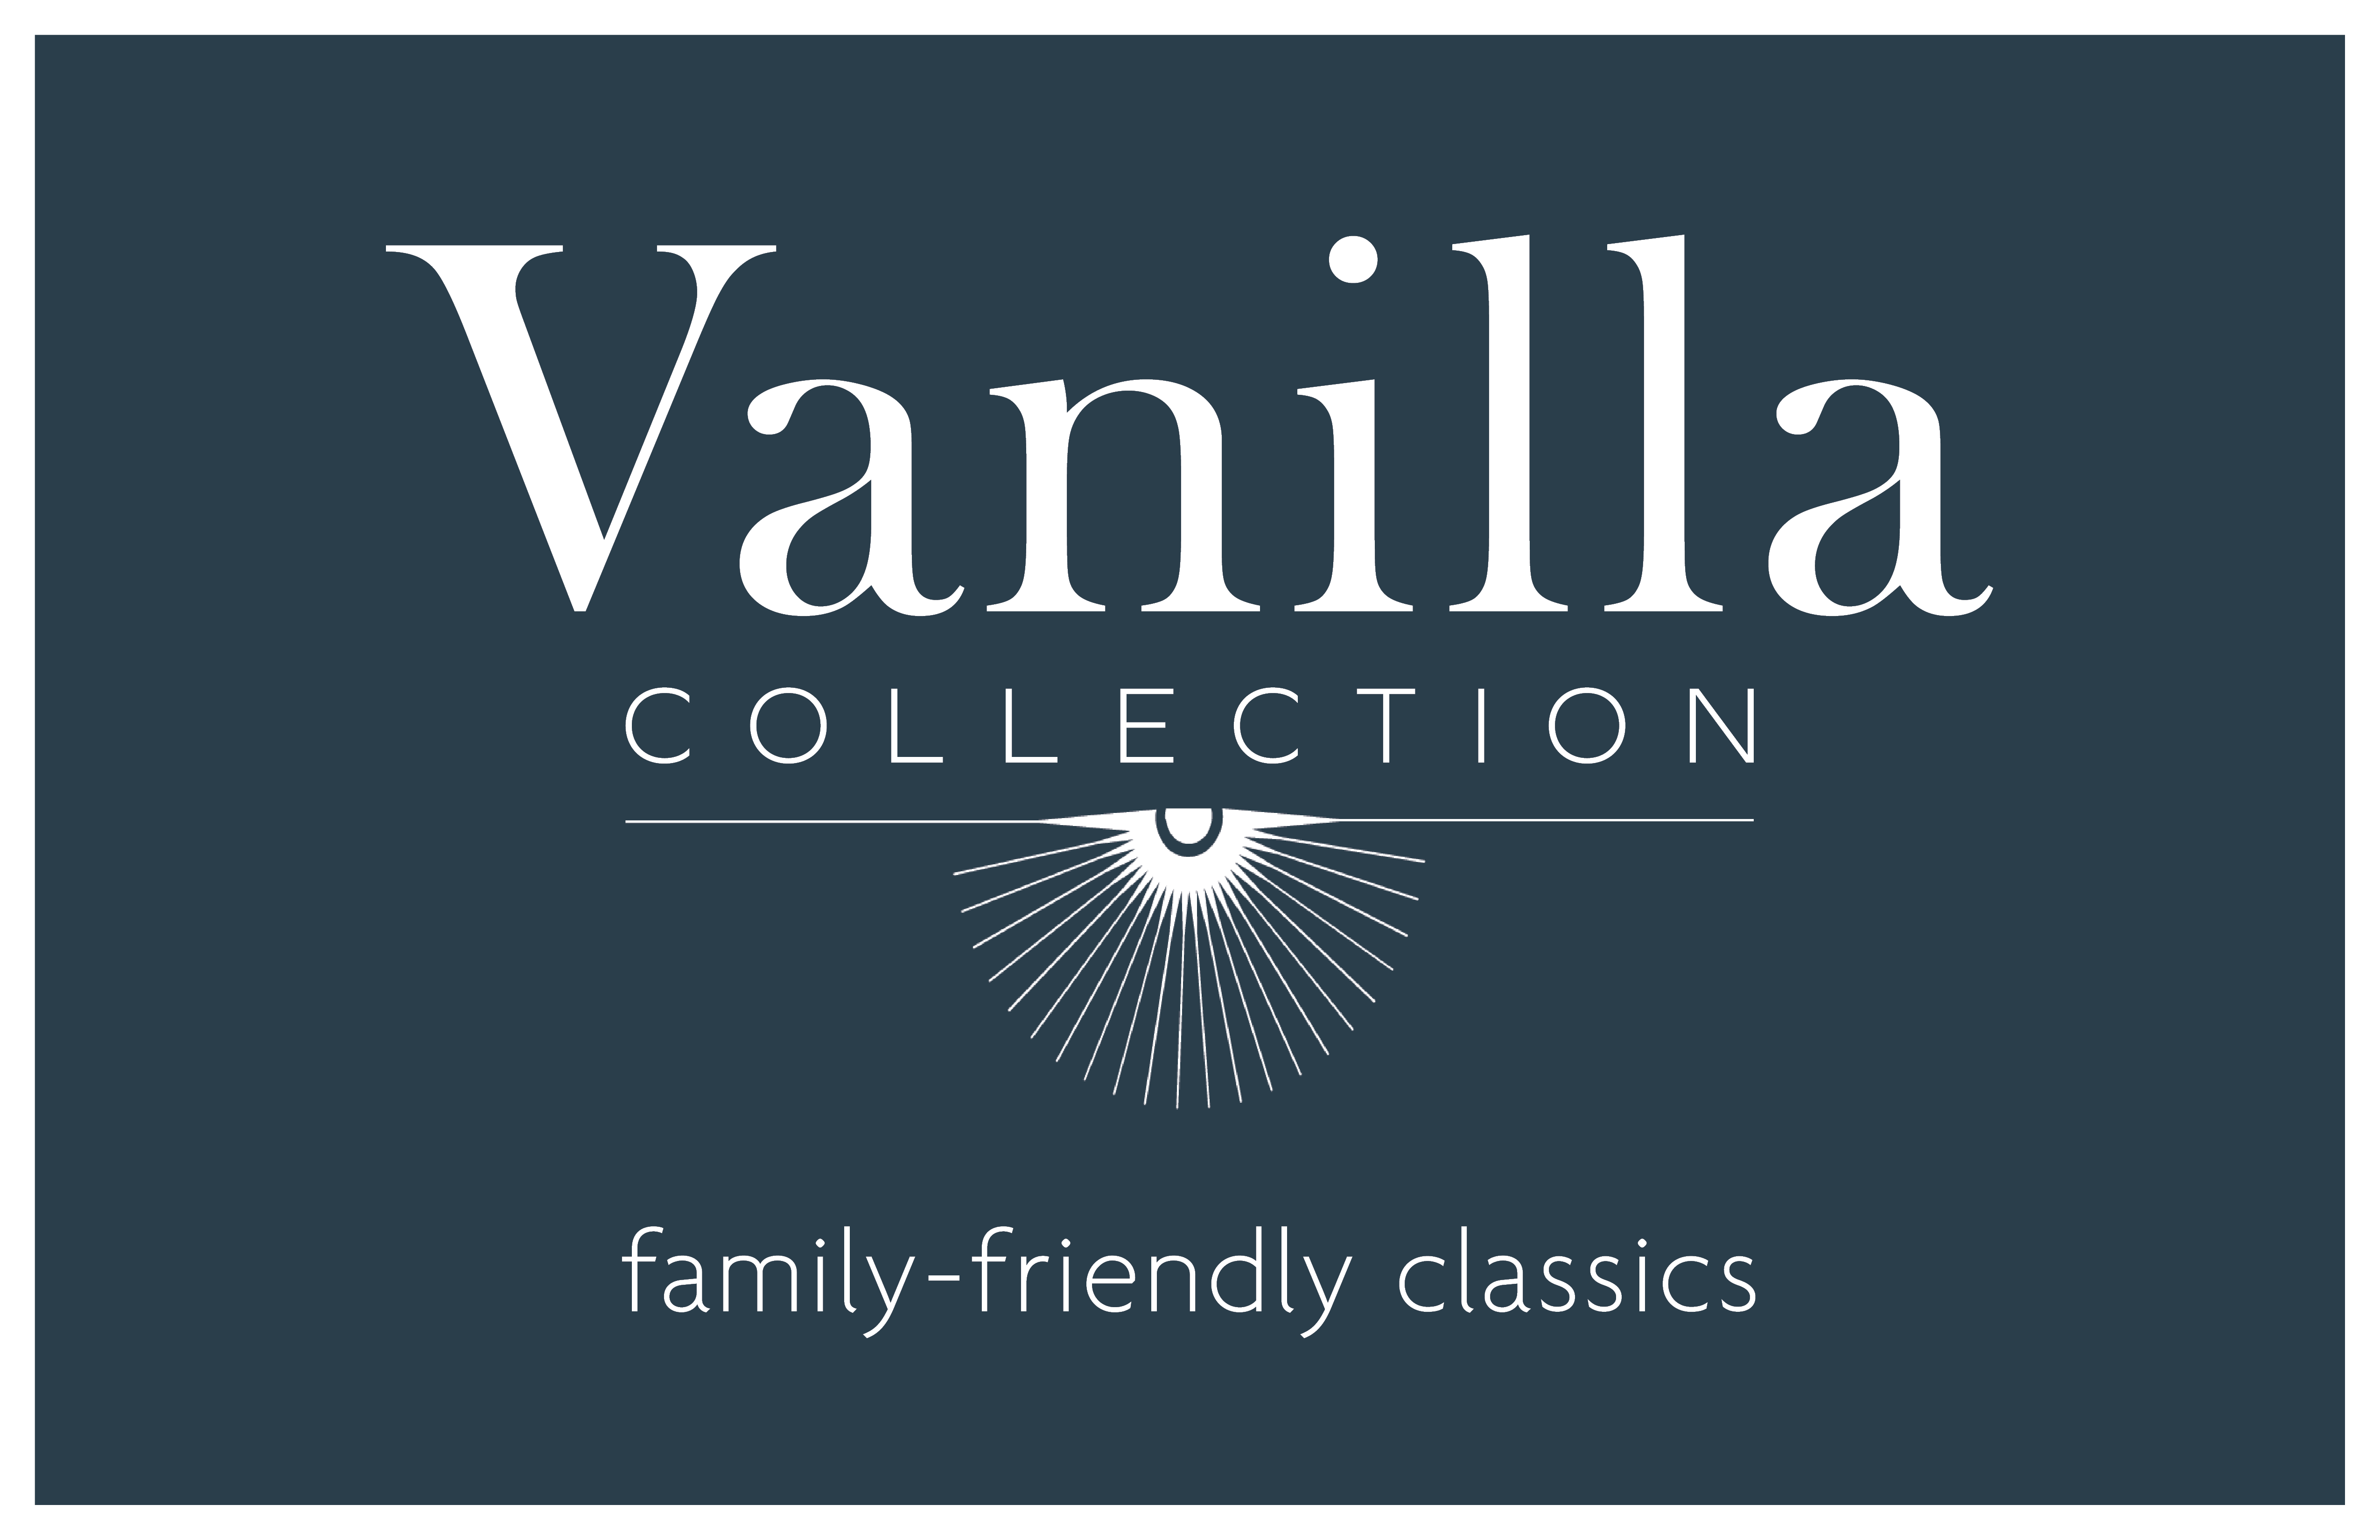 dark blue background with white text that says Vanilla Collection: family-friendly classics